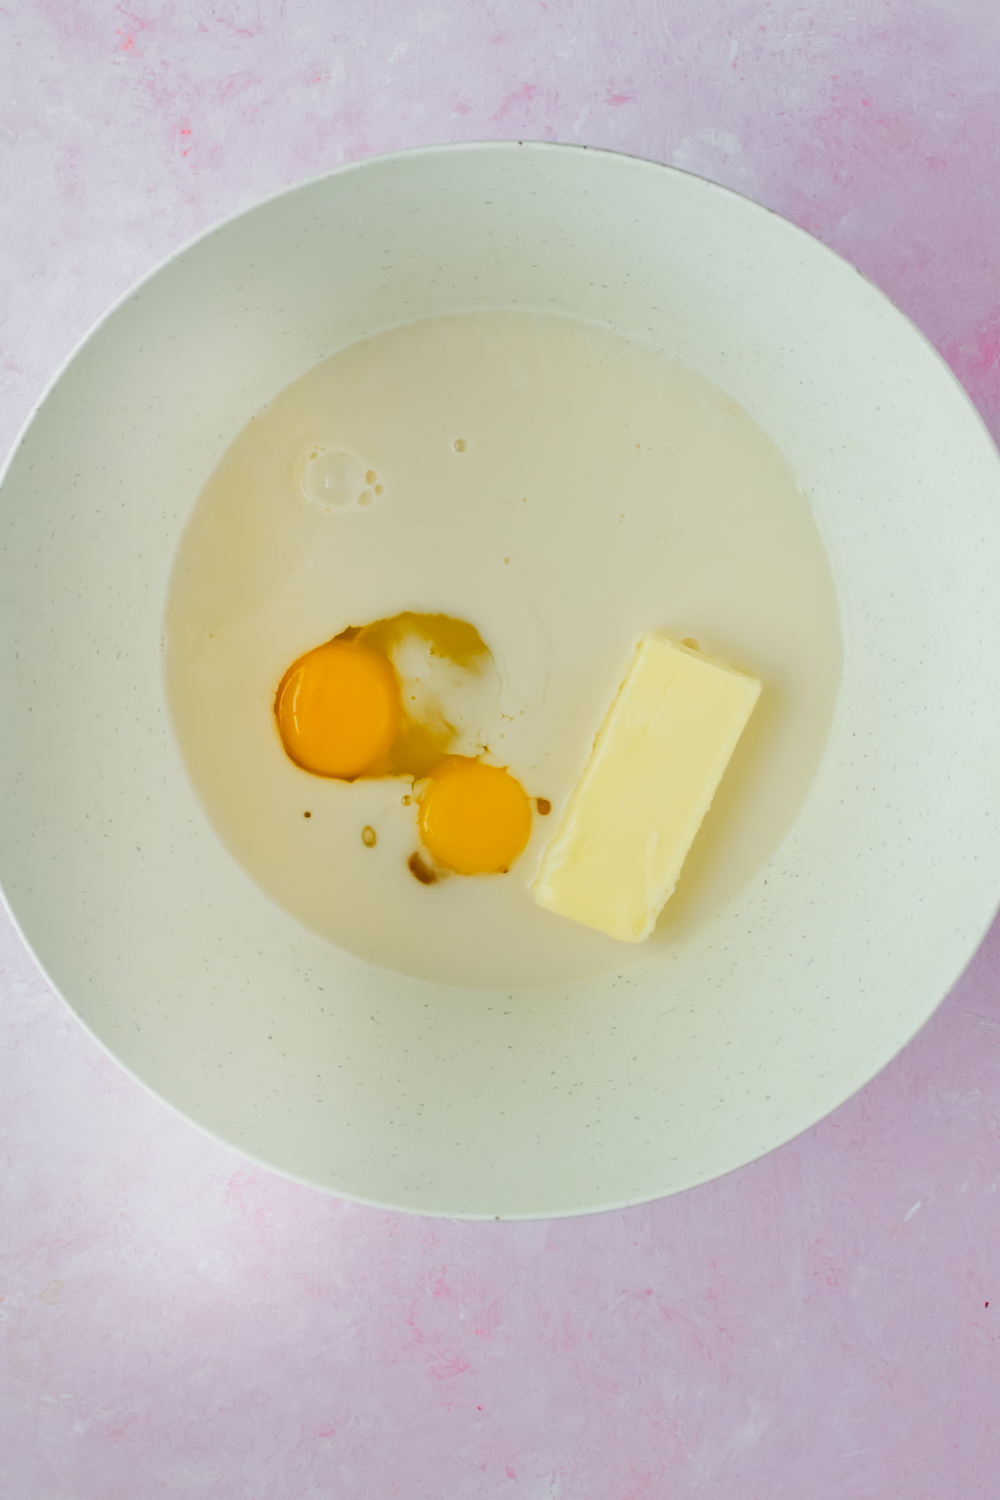 butter, milk and sugar in white bowl on light pink background.